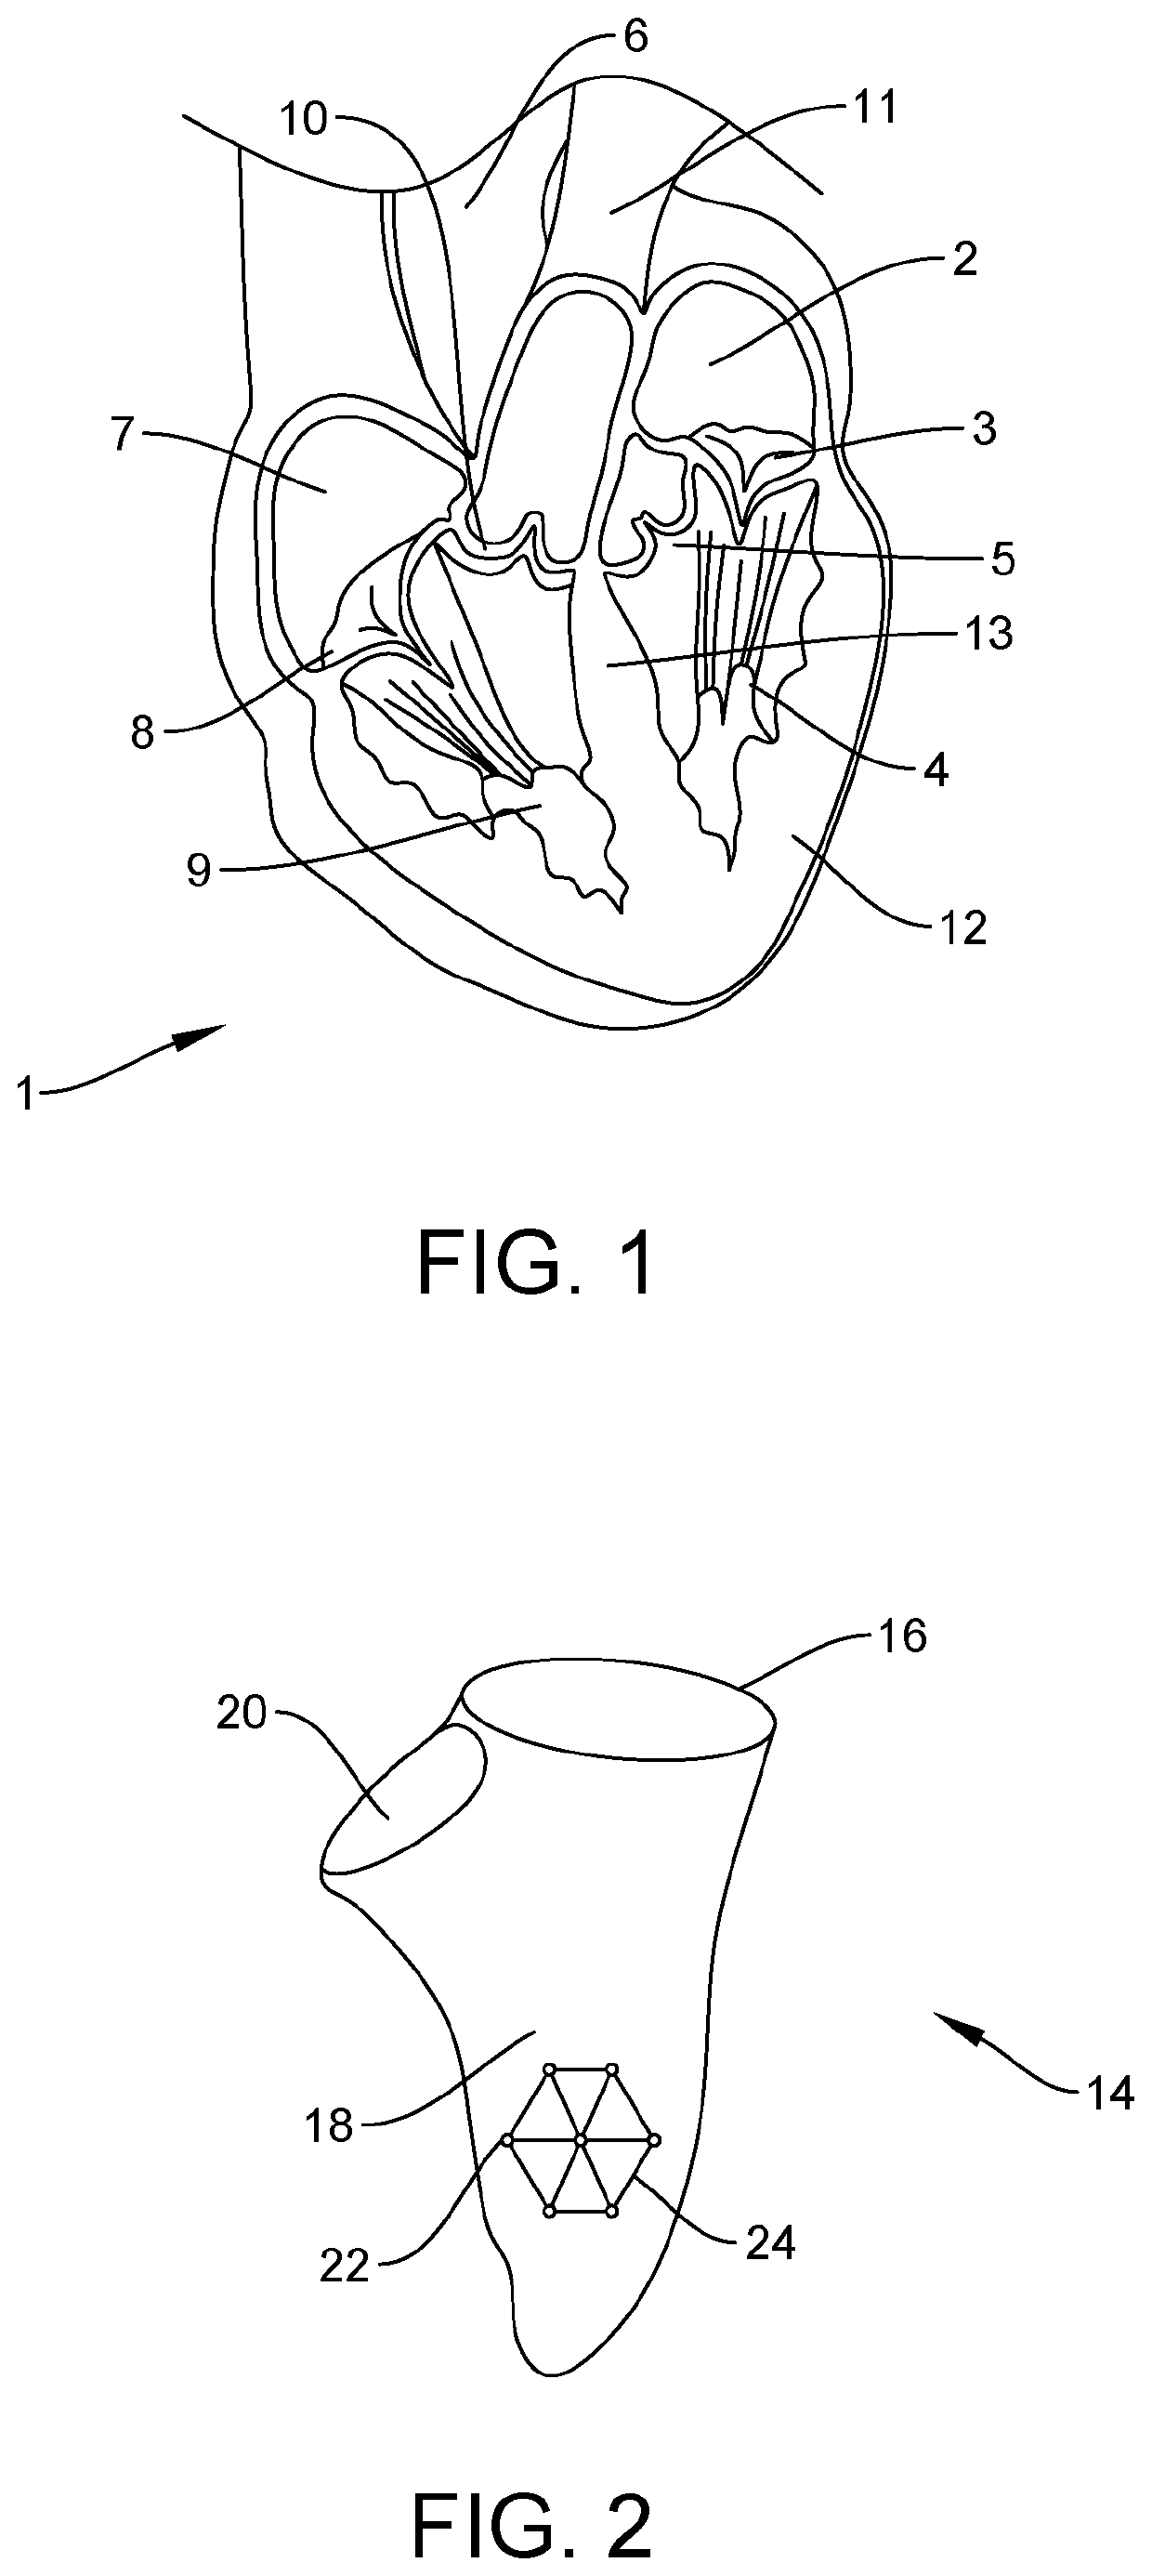 Method of visualizing a dynamic anatomical structure